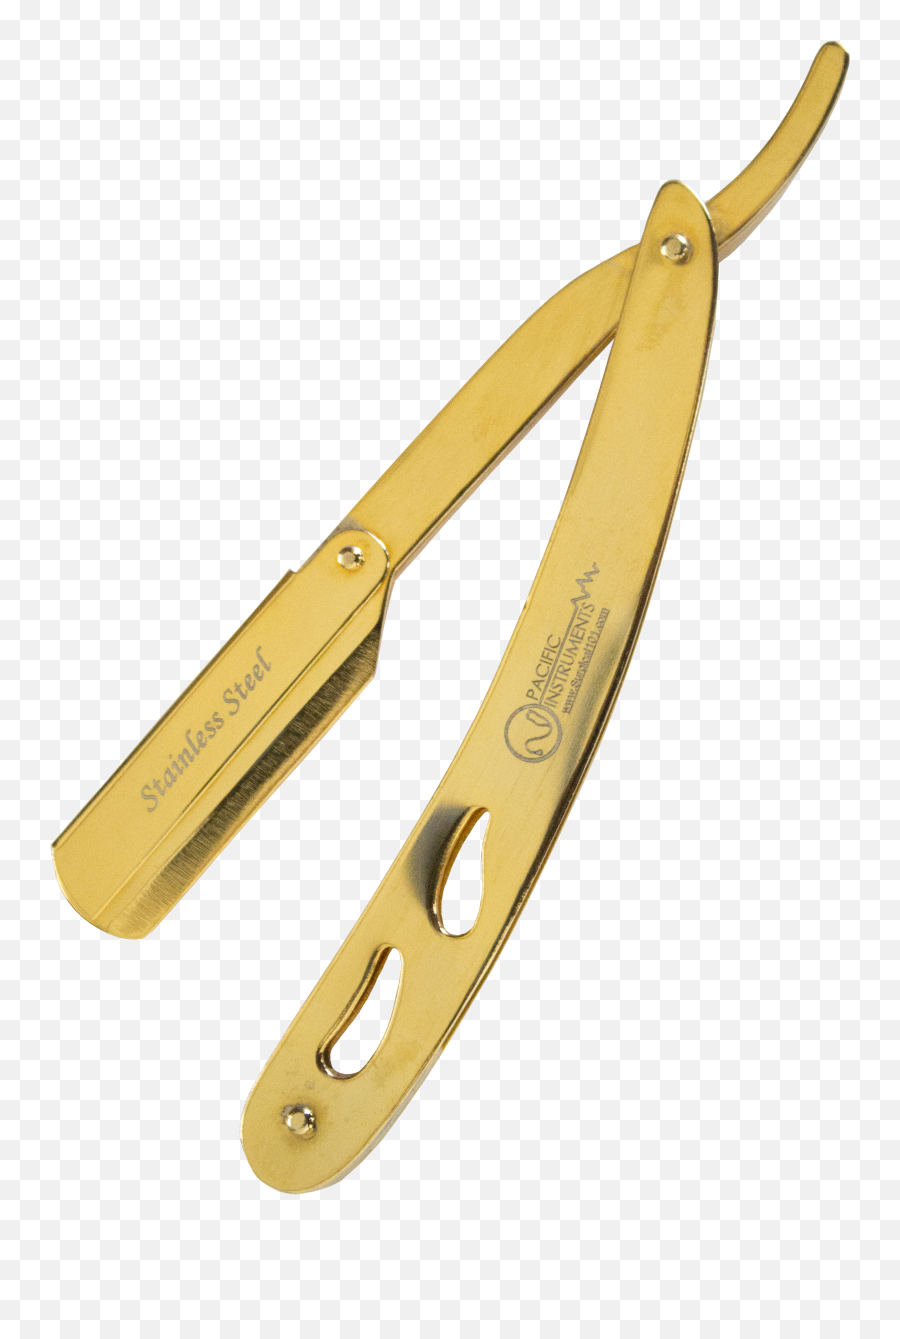 Items - Hand Tool Png,Straight Razor Png